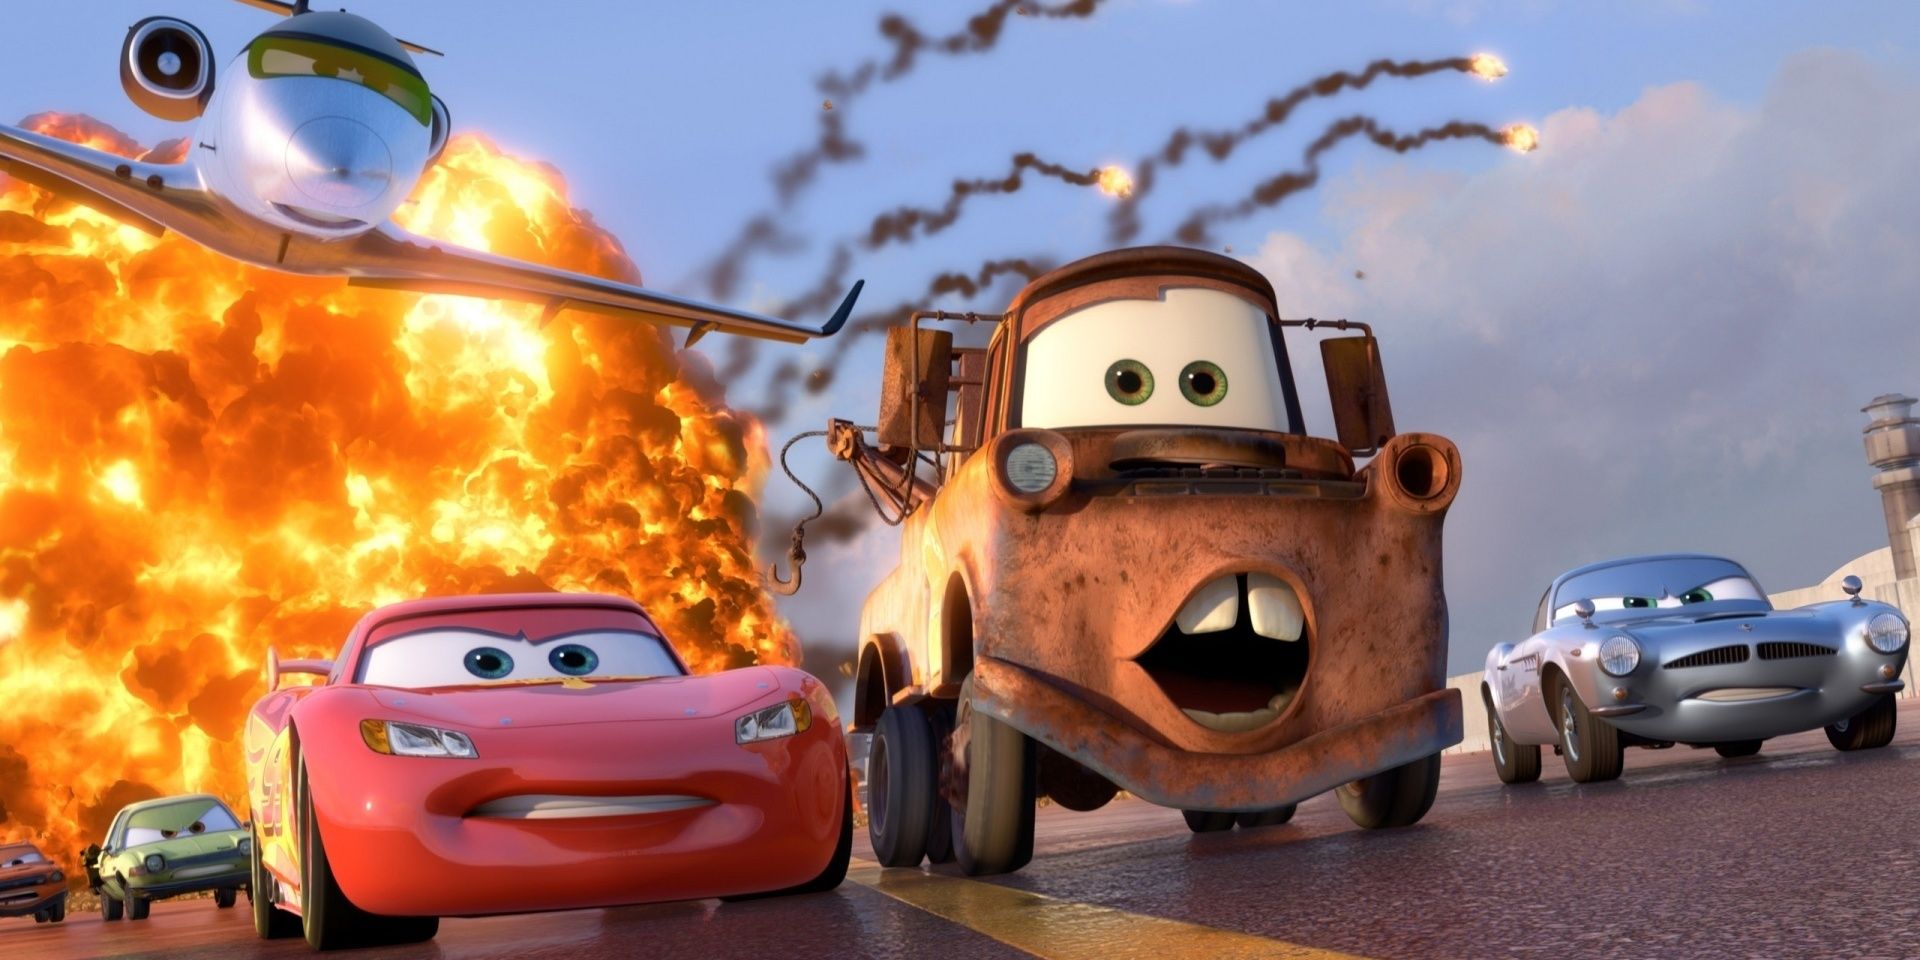 Lightning and Mater in a Cars 2 action scene